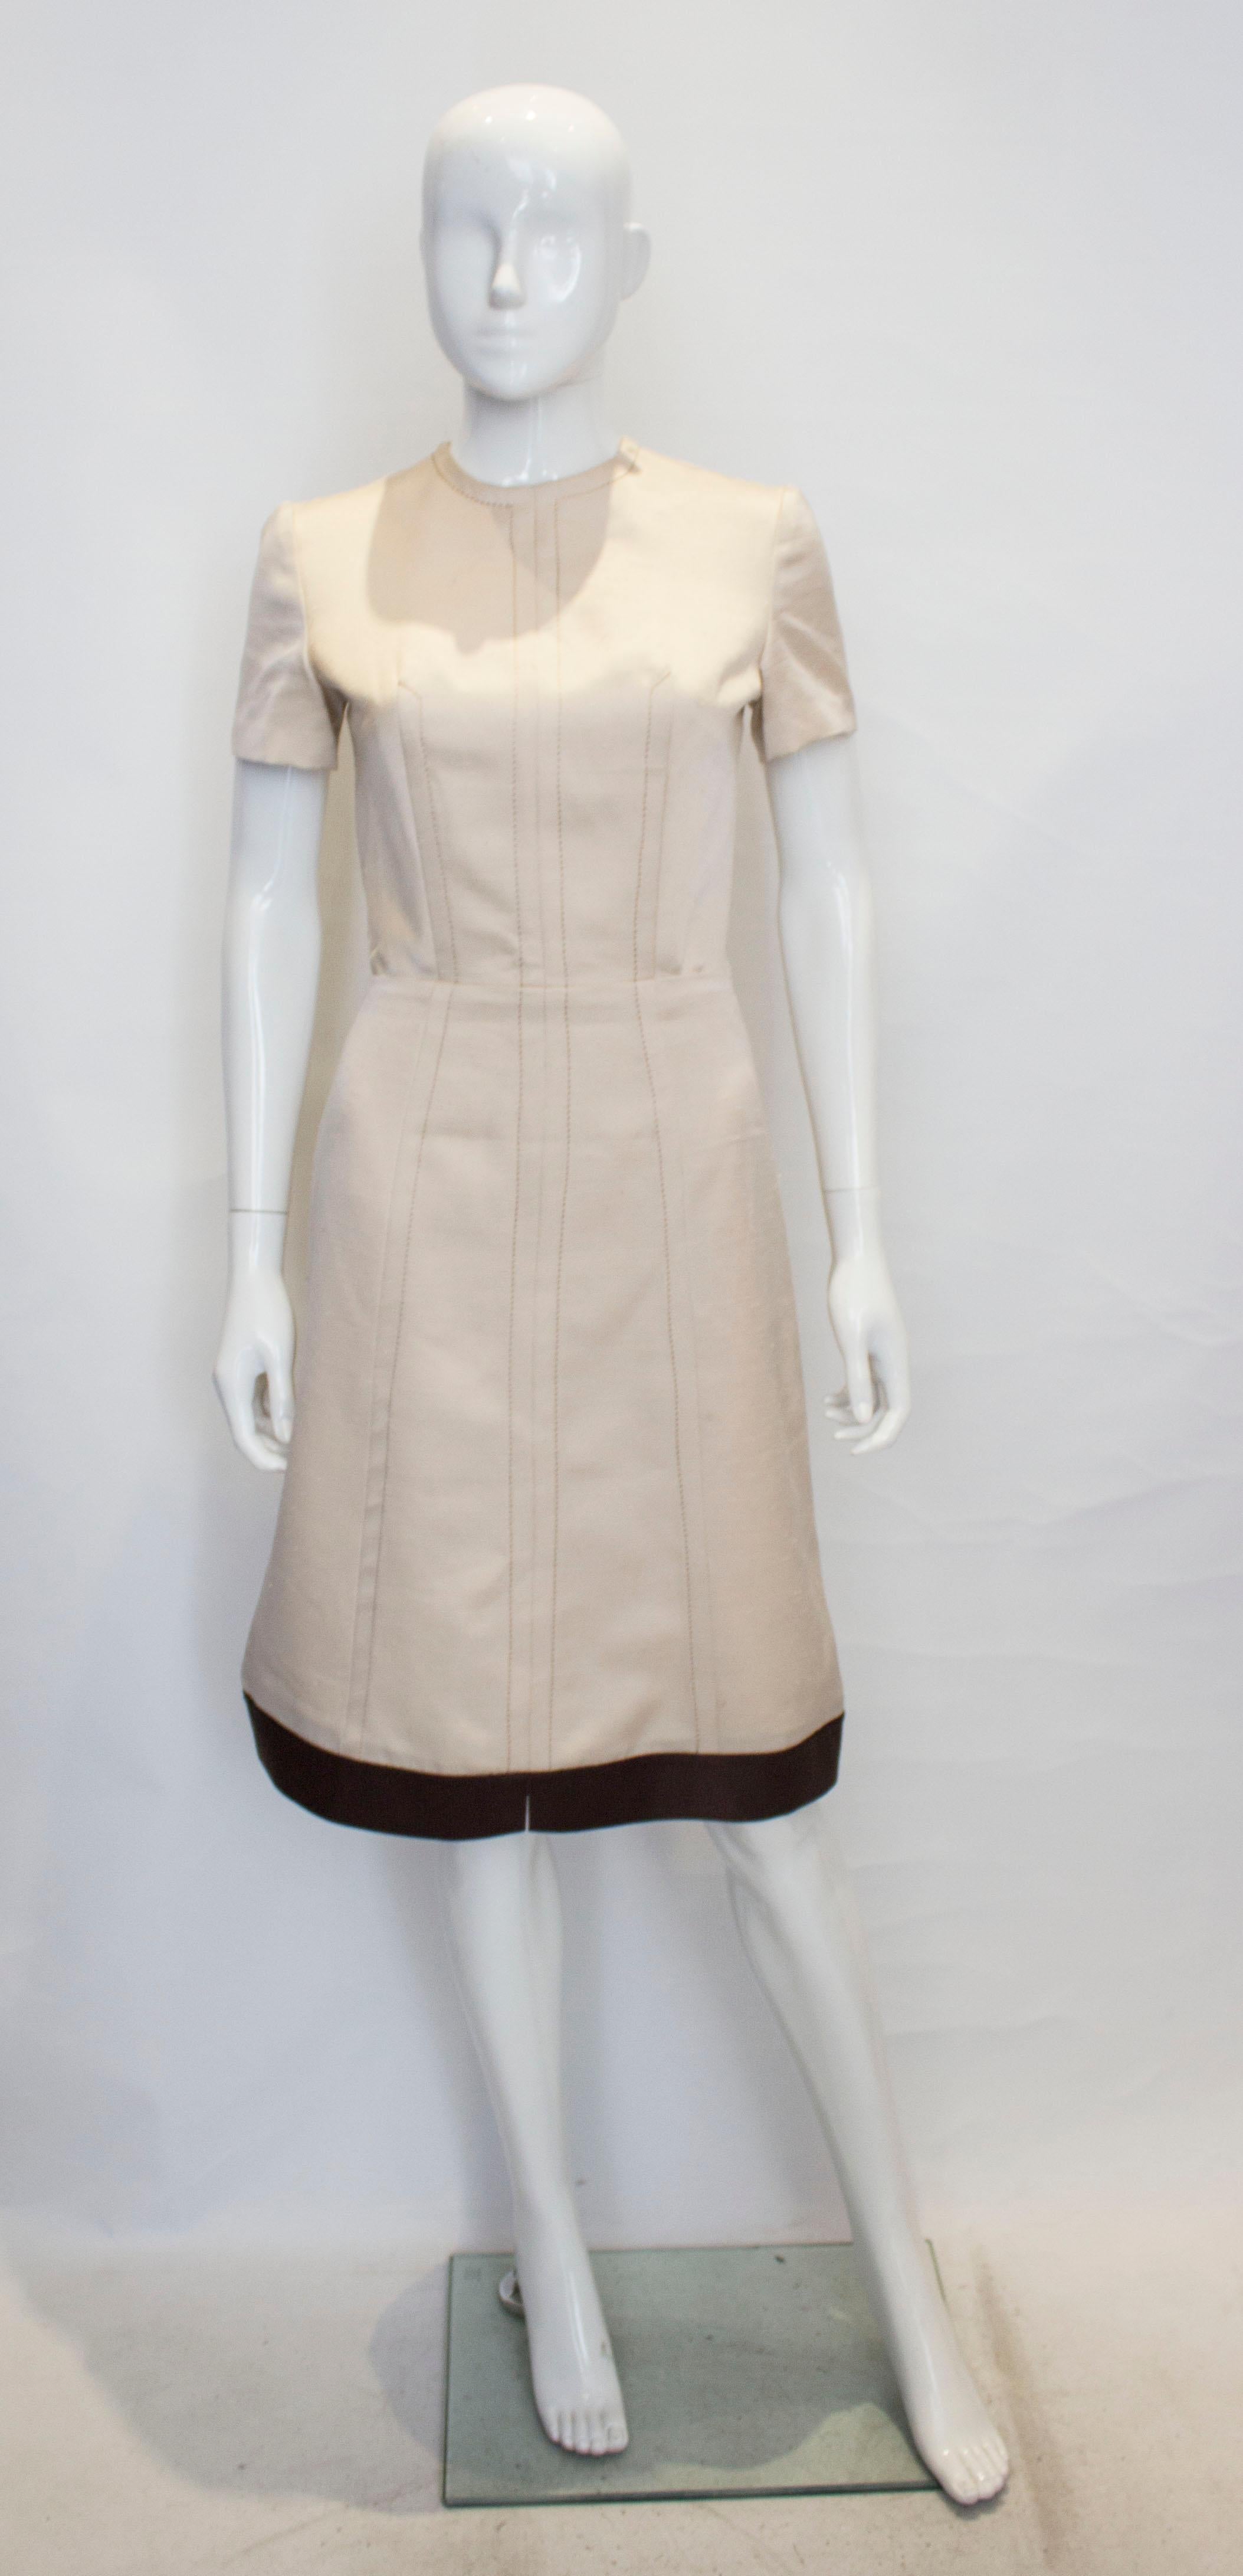 A vintage 1960s cream fitted raw silk dress with a brown silk hem 

fitted at the waist zips up the back with a interesting stitch detail across the bodice

measurements taken flat in inches 

bust - 16
waist - 13
length - 41